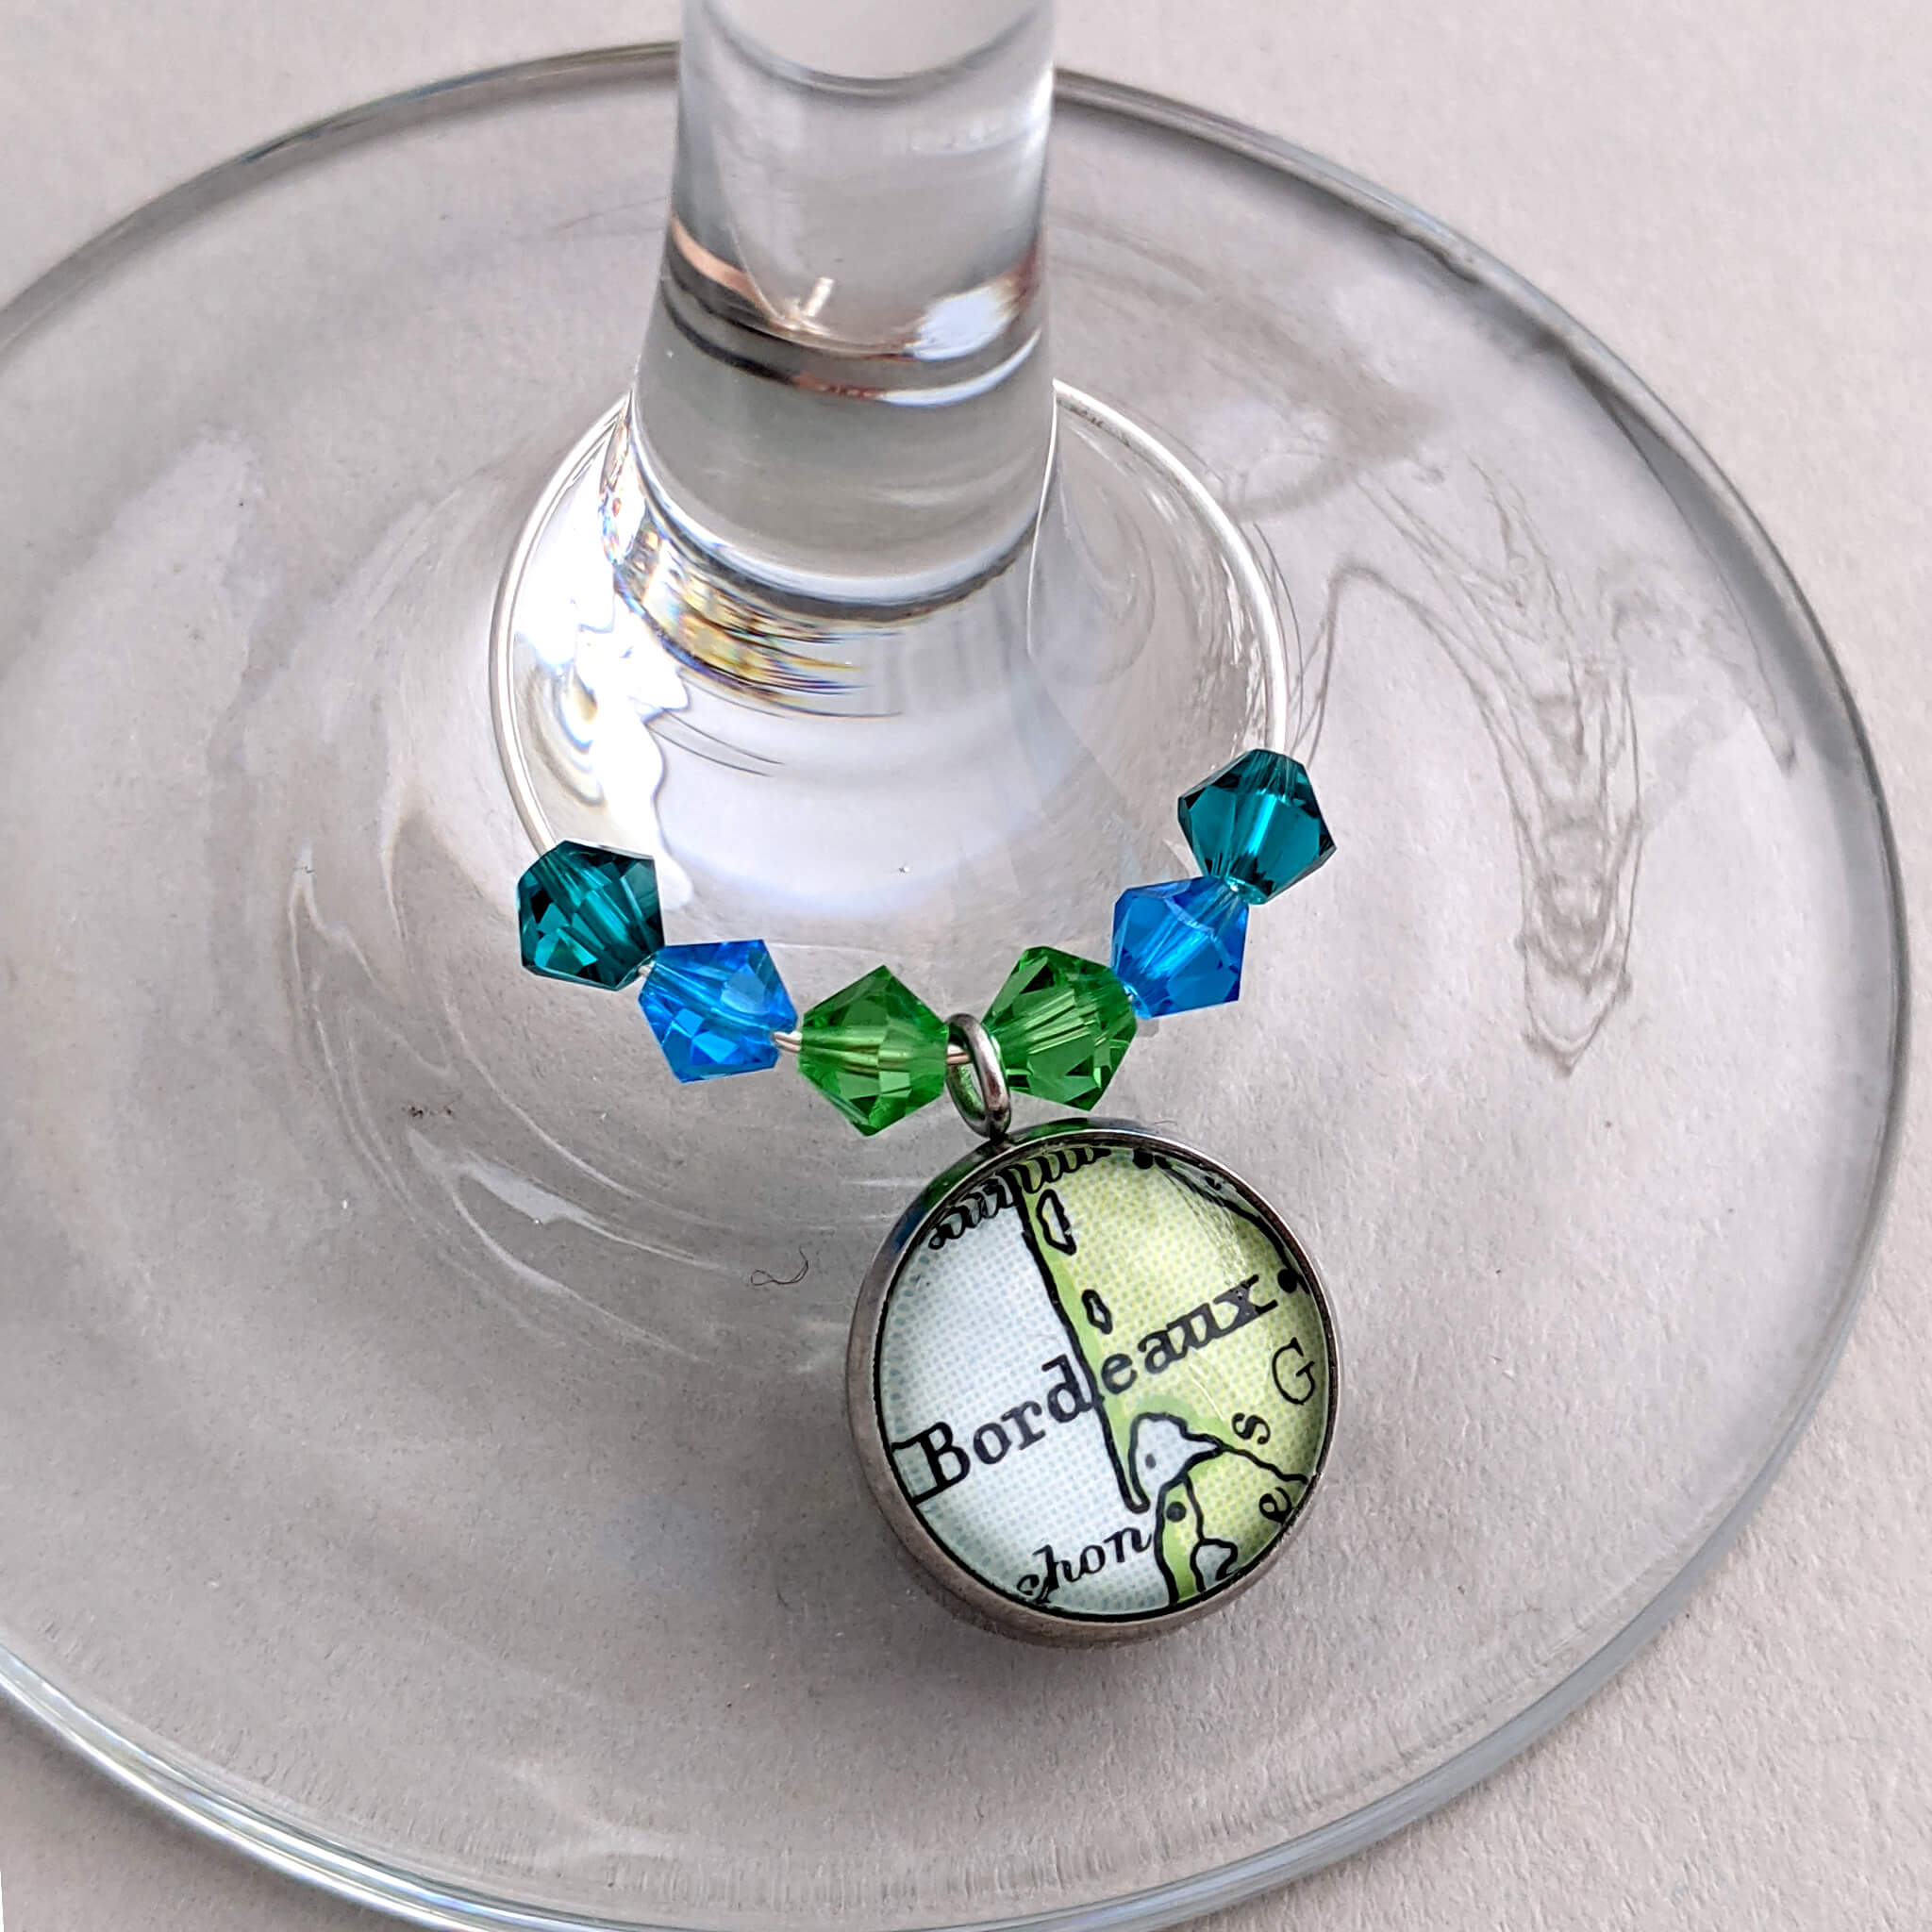 wine glass charm in green and blue tone personalised with map of Bordeaux